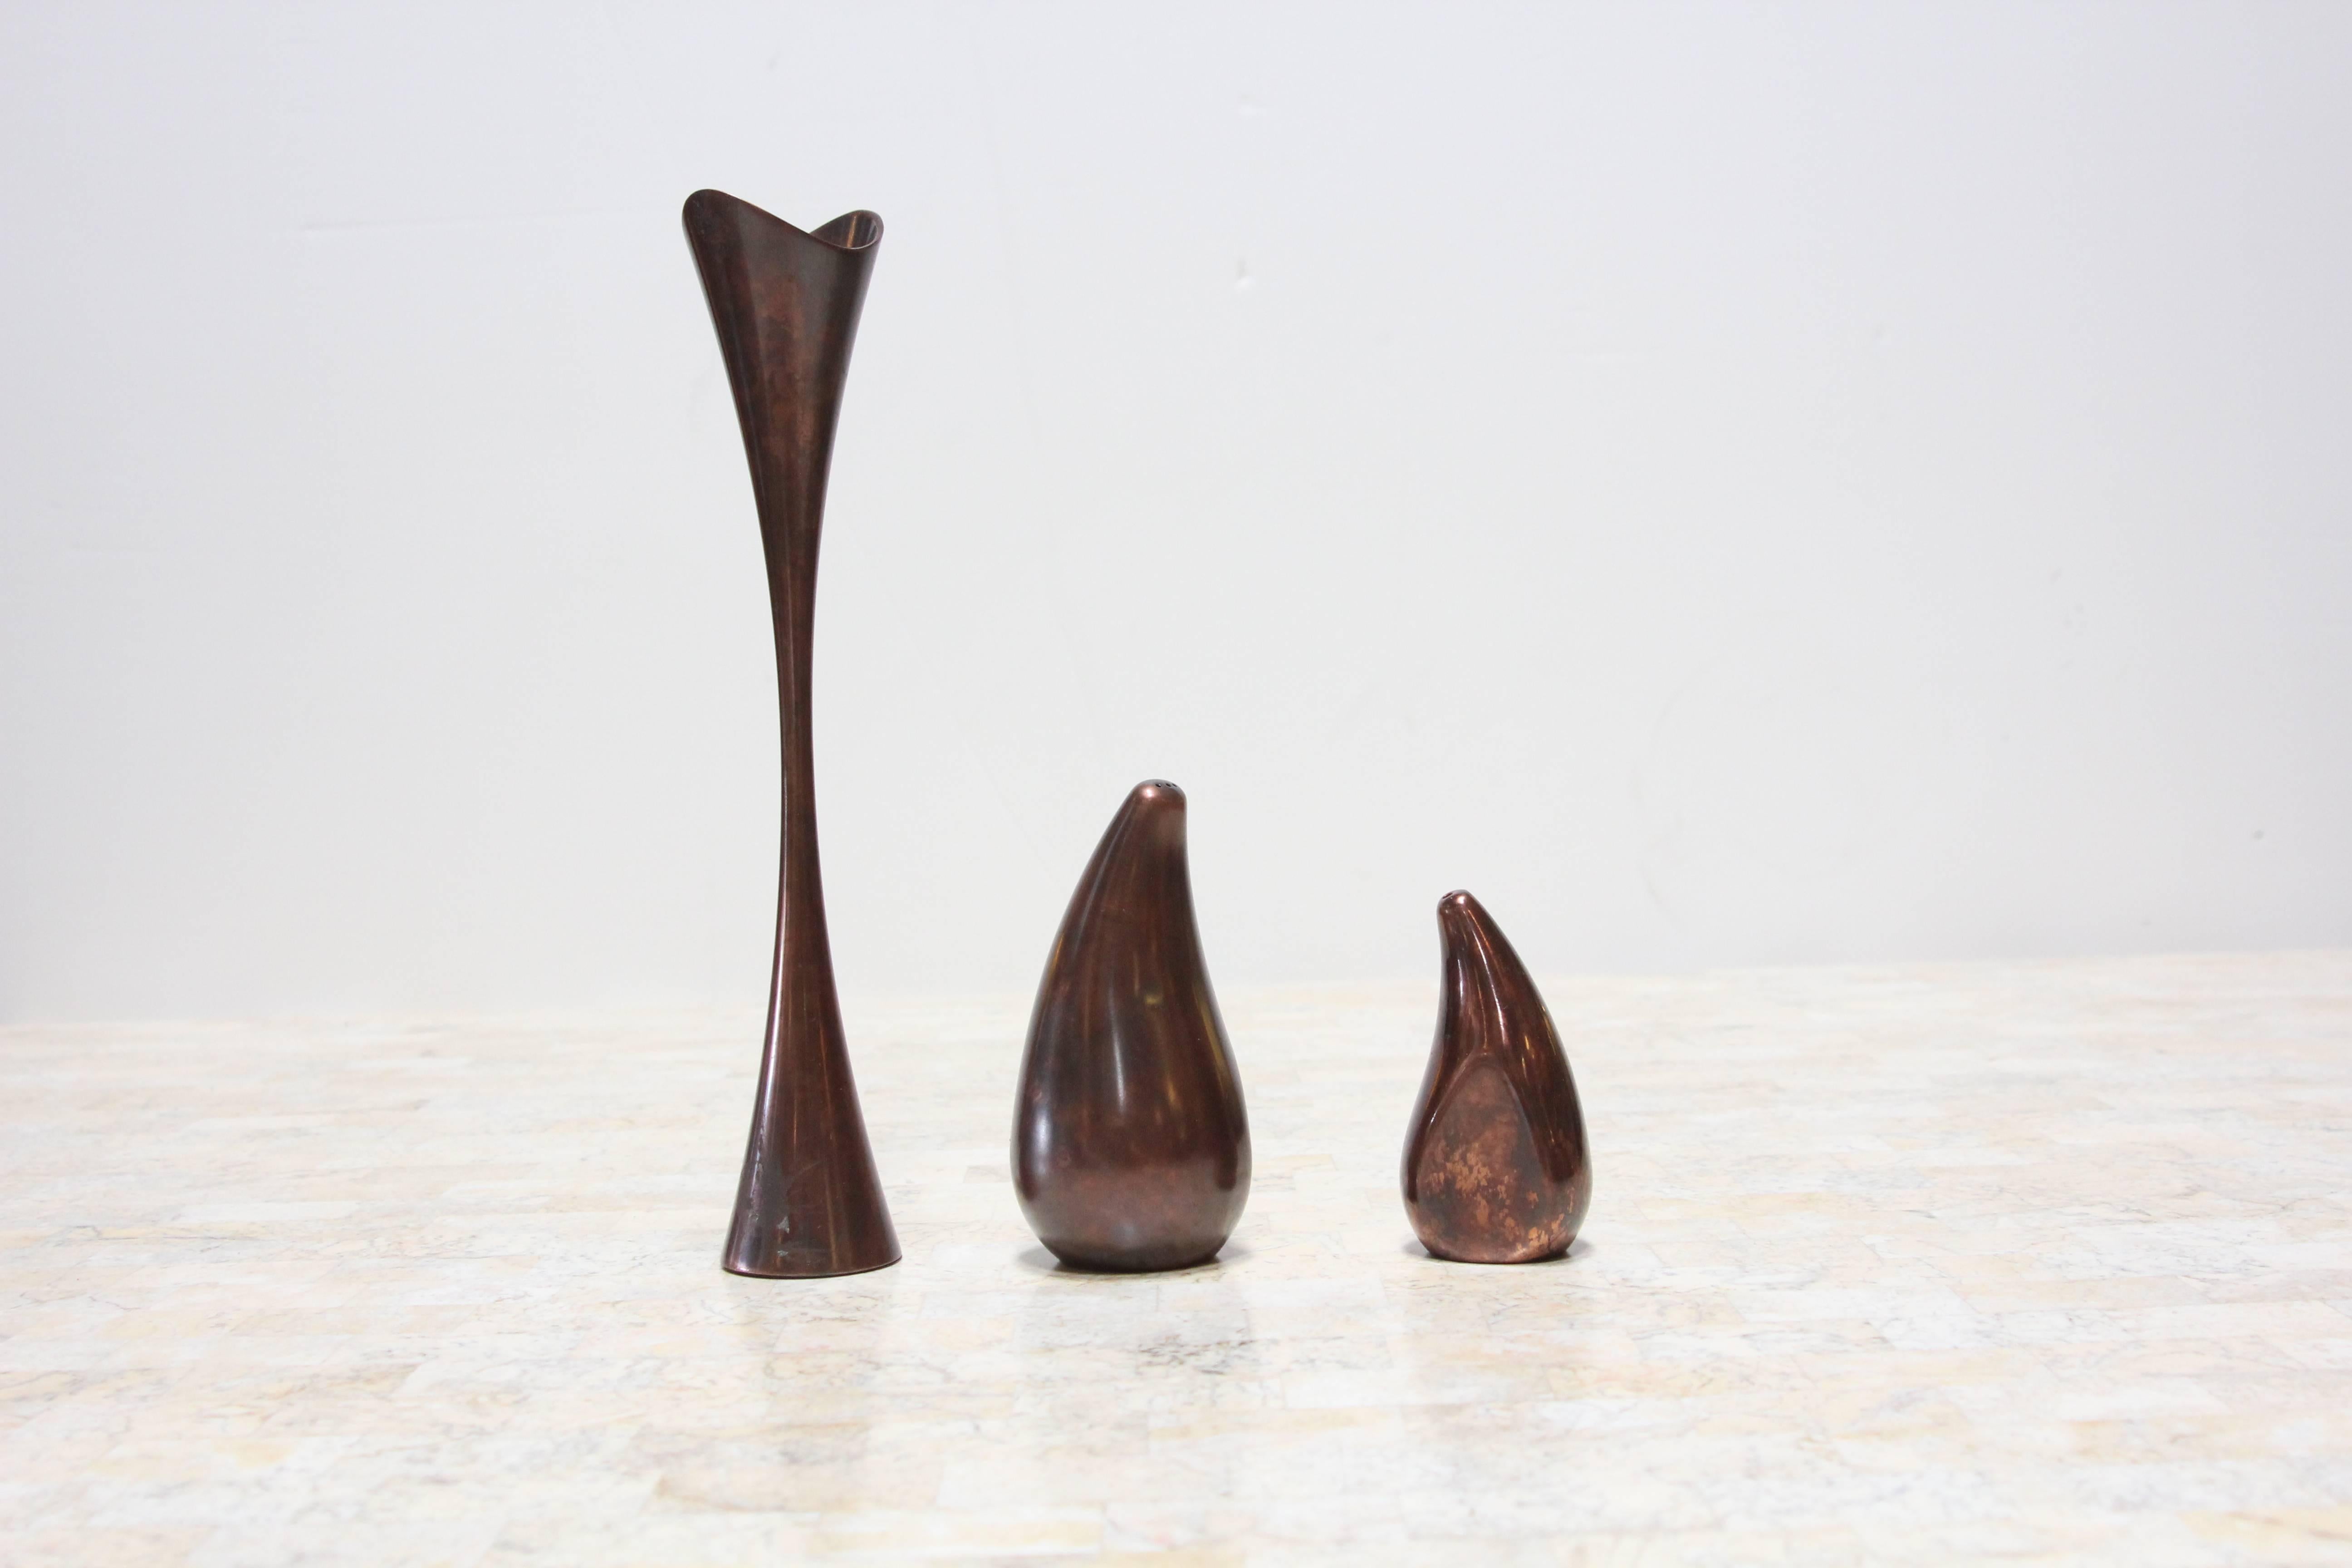 Set of three pieces in patinated copper by Nambe.
Salt and pepper shakers which each have one flat edge and fit perfectly together, and a matching candleholder. Inside of candle holder is cleverly designed so that it can hold either a votive or